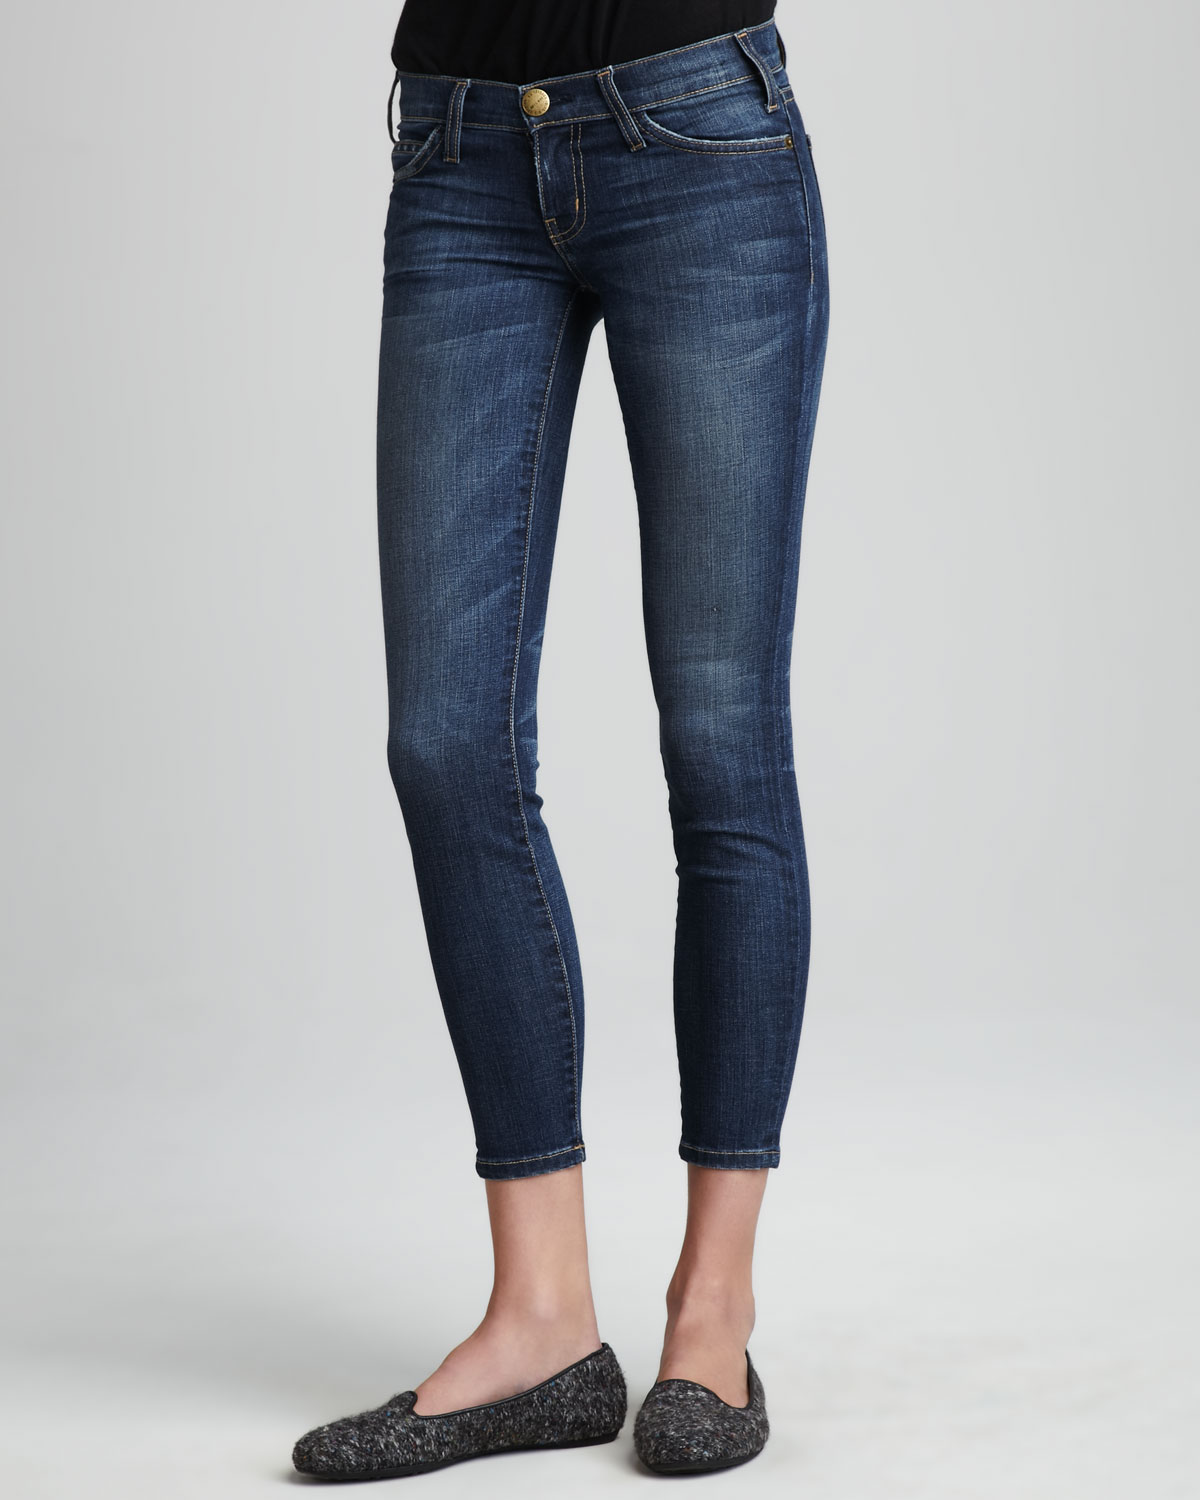 Lyst - Current/Elliott The Stiletto Townie Jeans in Blue